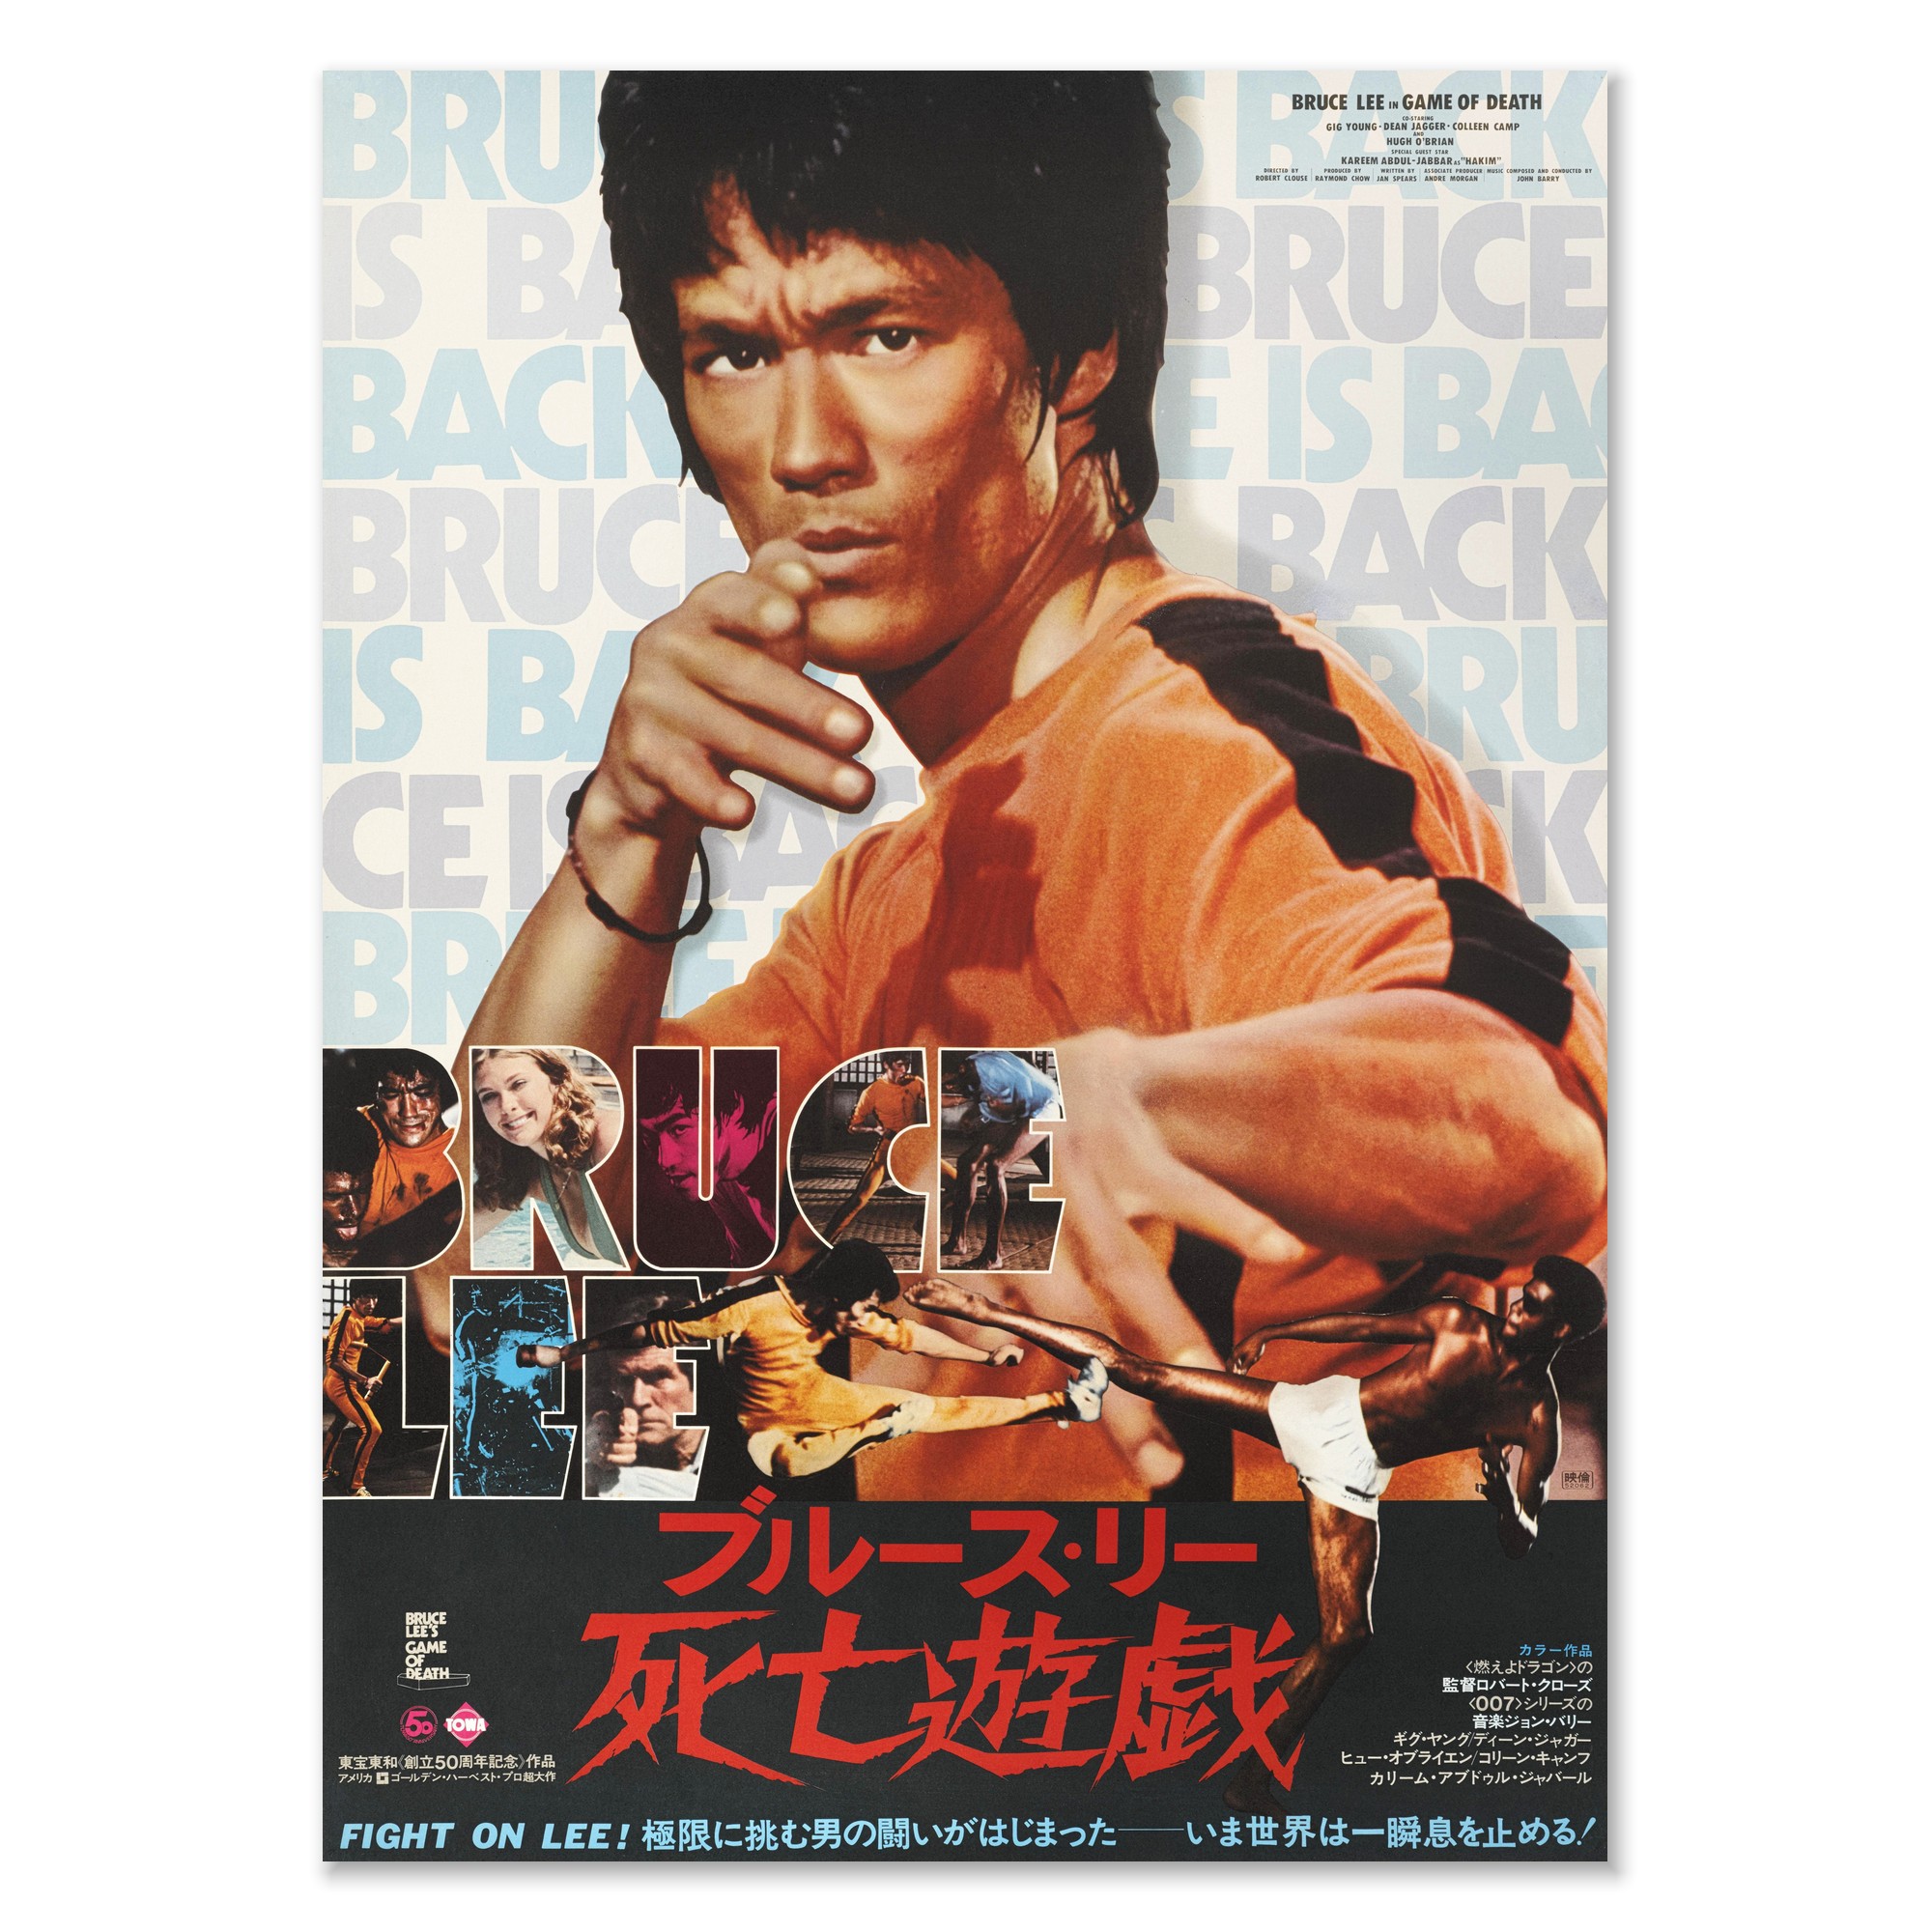 Movies Comics Posters :: Japanese Posters :: 1978 Game of Death Bruce Lee  Japanese Movie Poster (Based on Pre-Order only) - Poster Hub